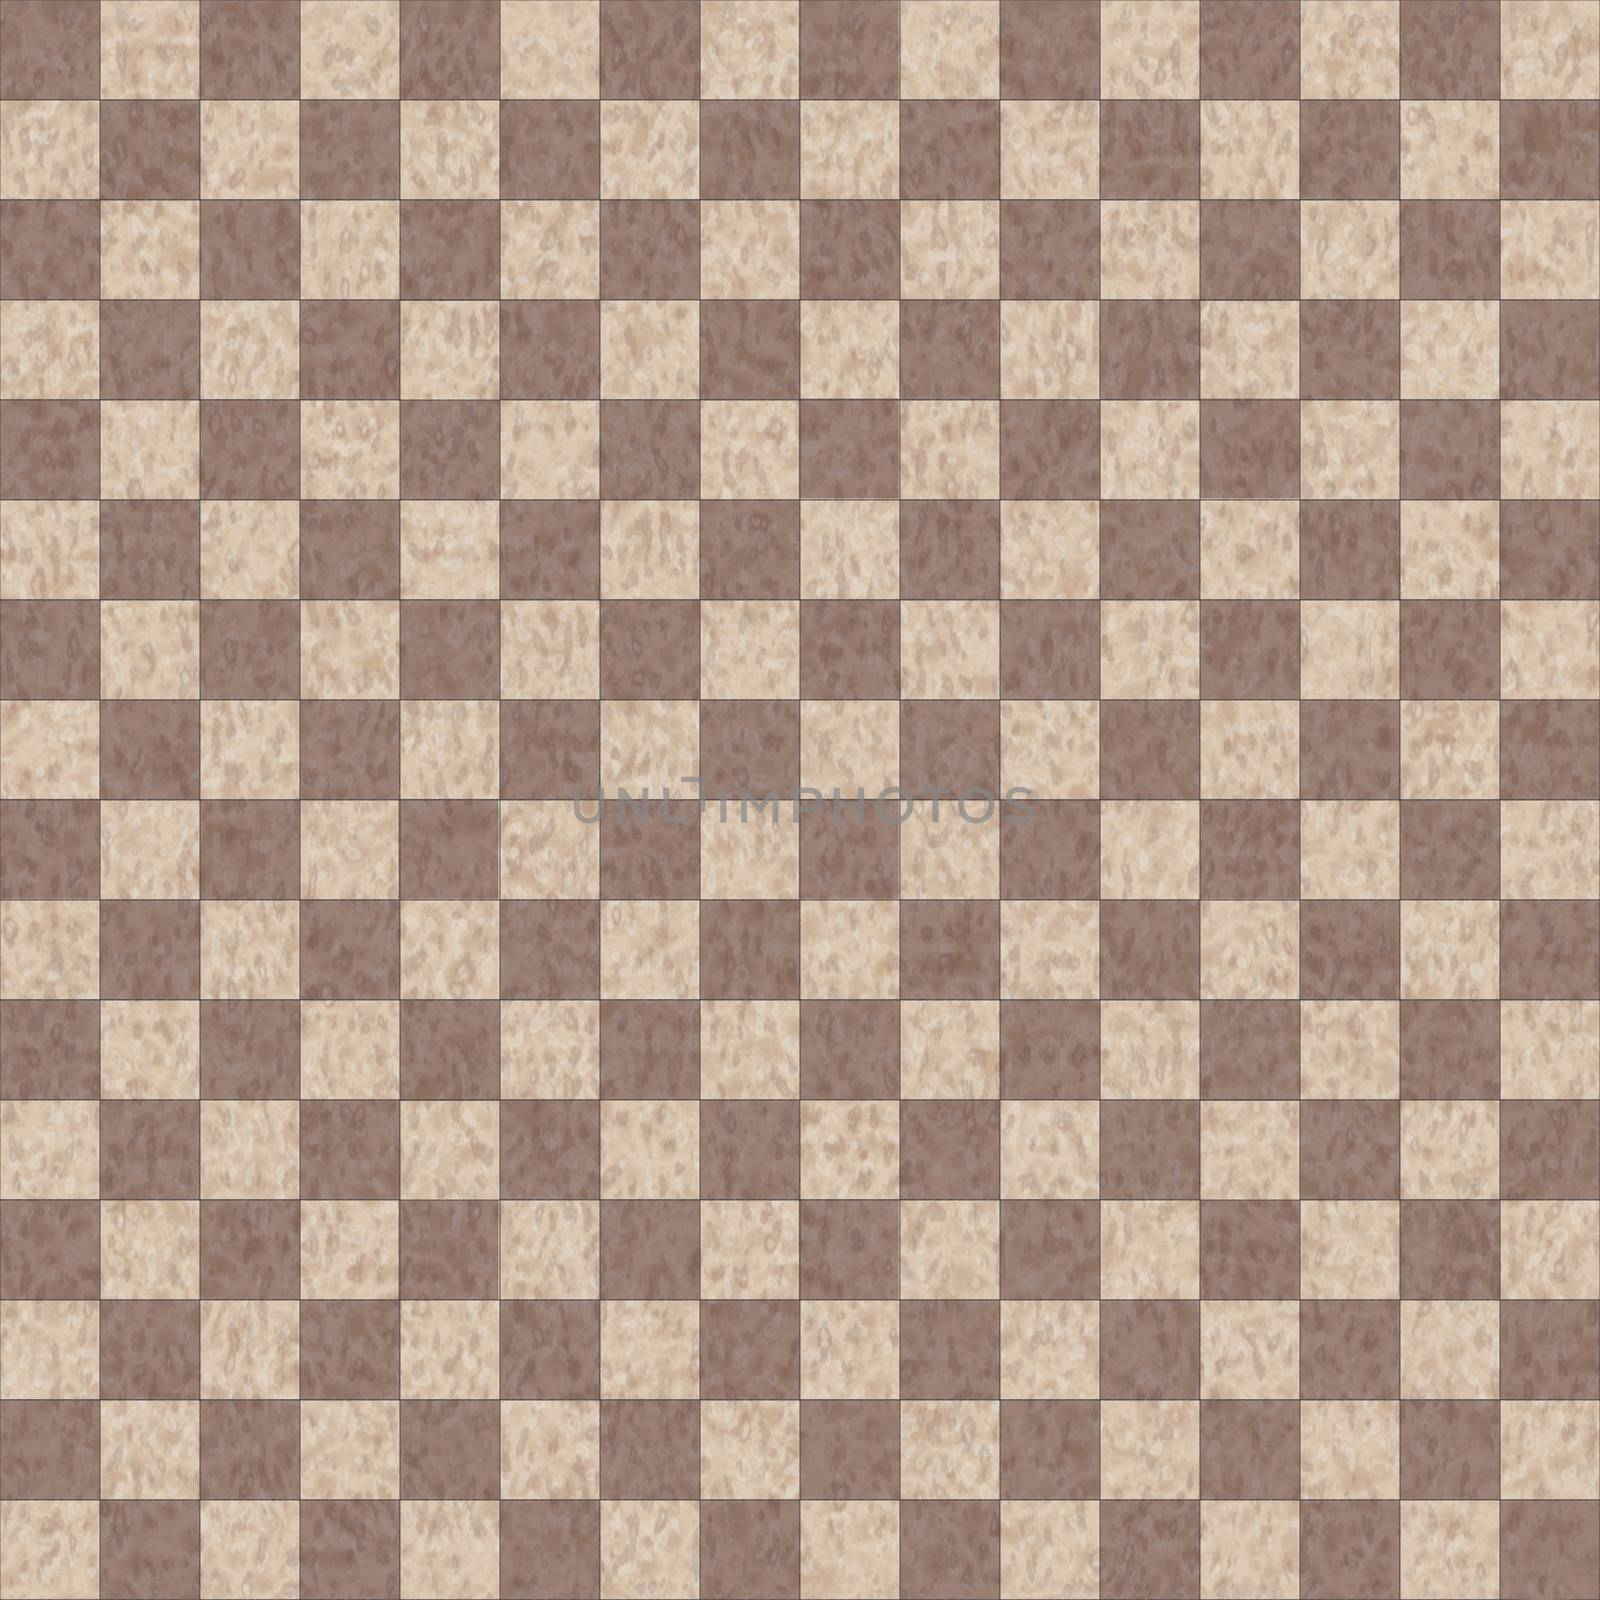 The wall is lined with small square tiles of brown color in the form of a chessboard.Texture or background